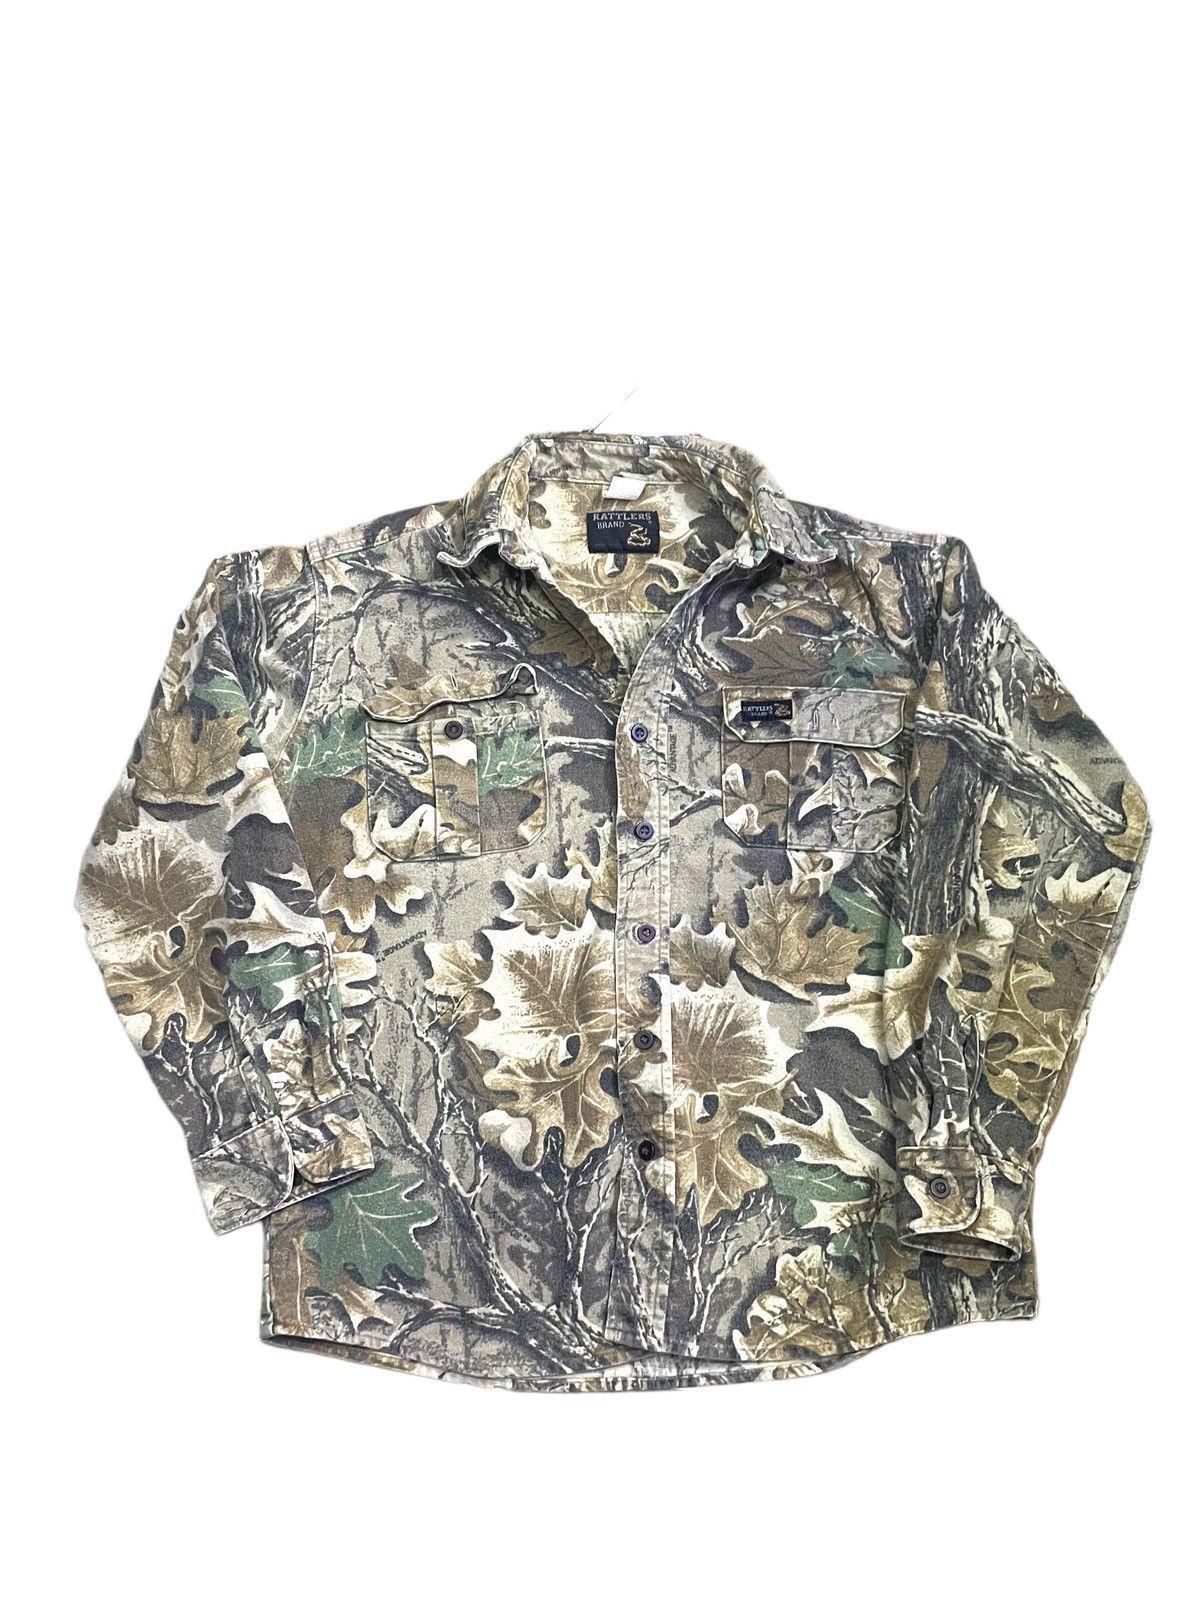 Vintage Men's Vintage Rattlers Realtree Camo Chamois Button Up